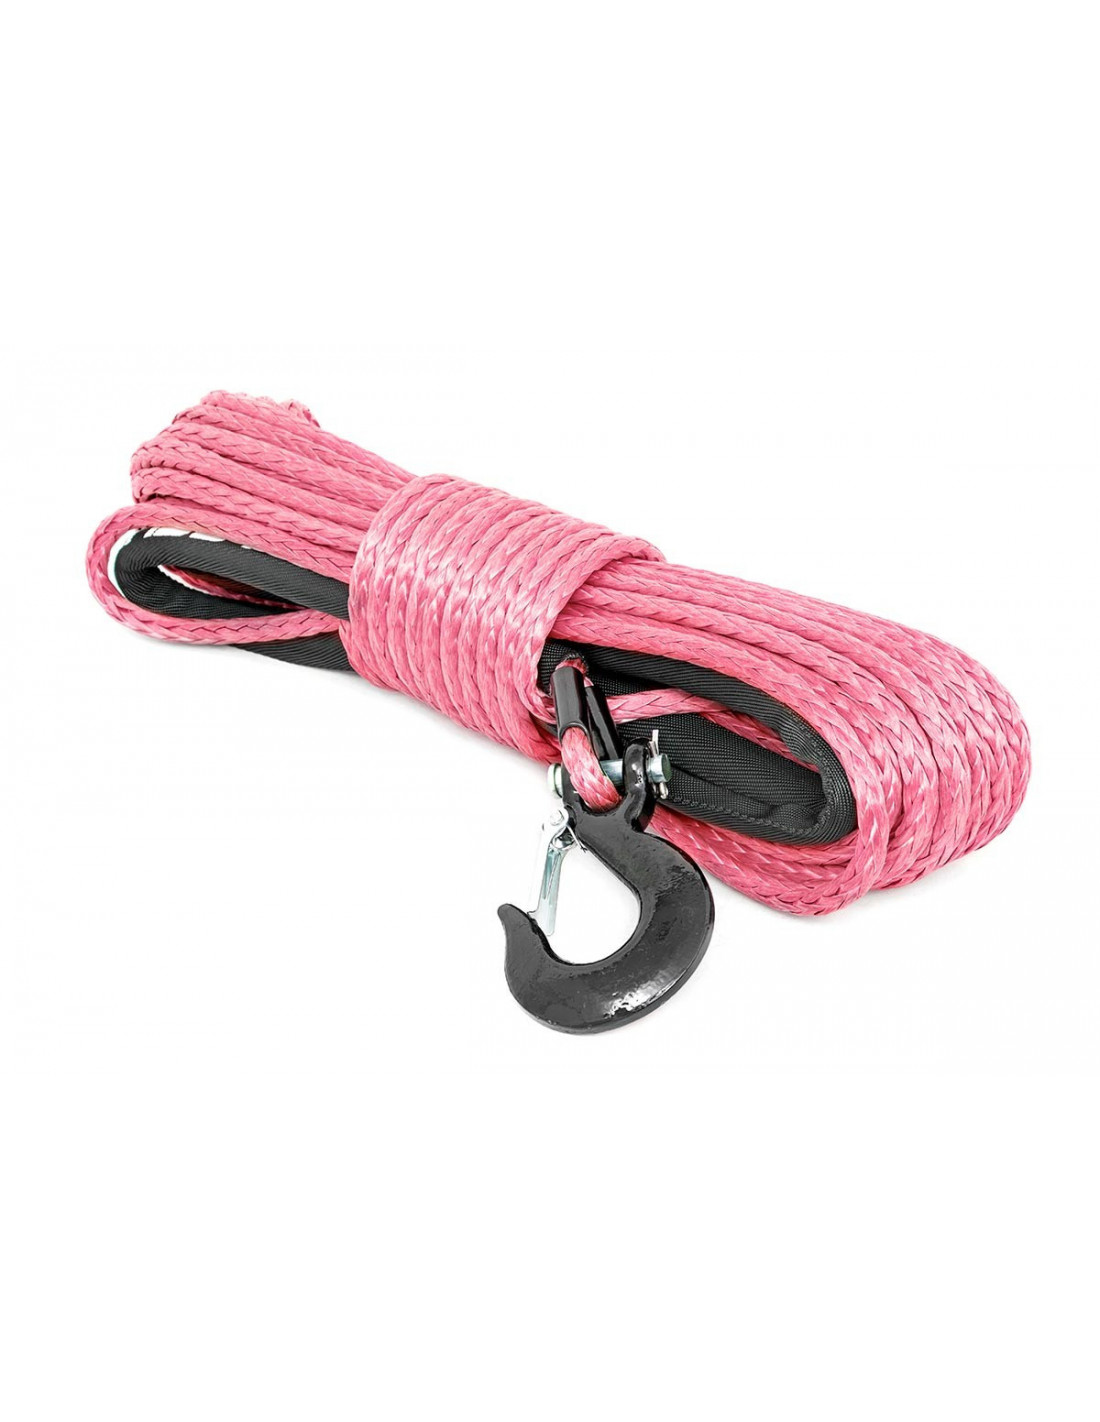 https://jking4x4.com/36681-thickbox_default/synthetic-rope-3-8-inch-85-ft-length-pink.jpg